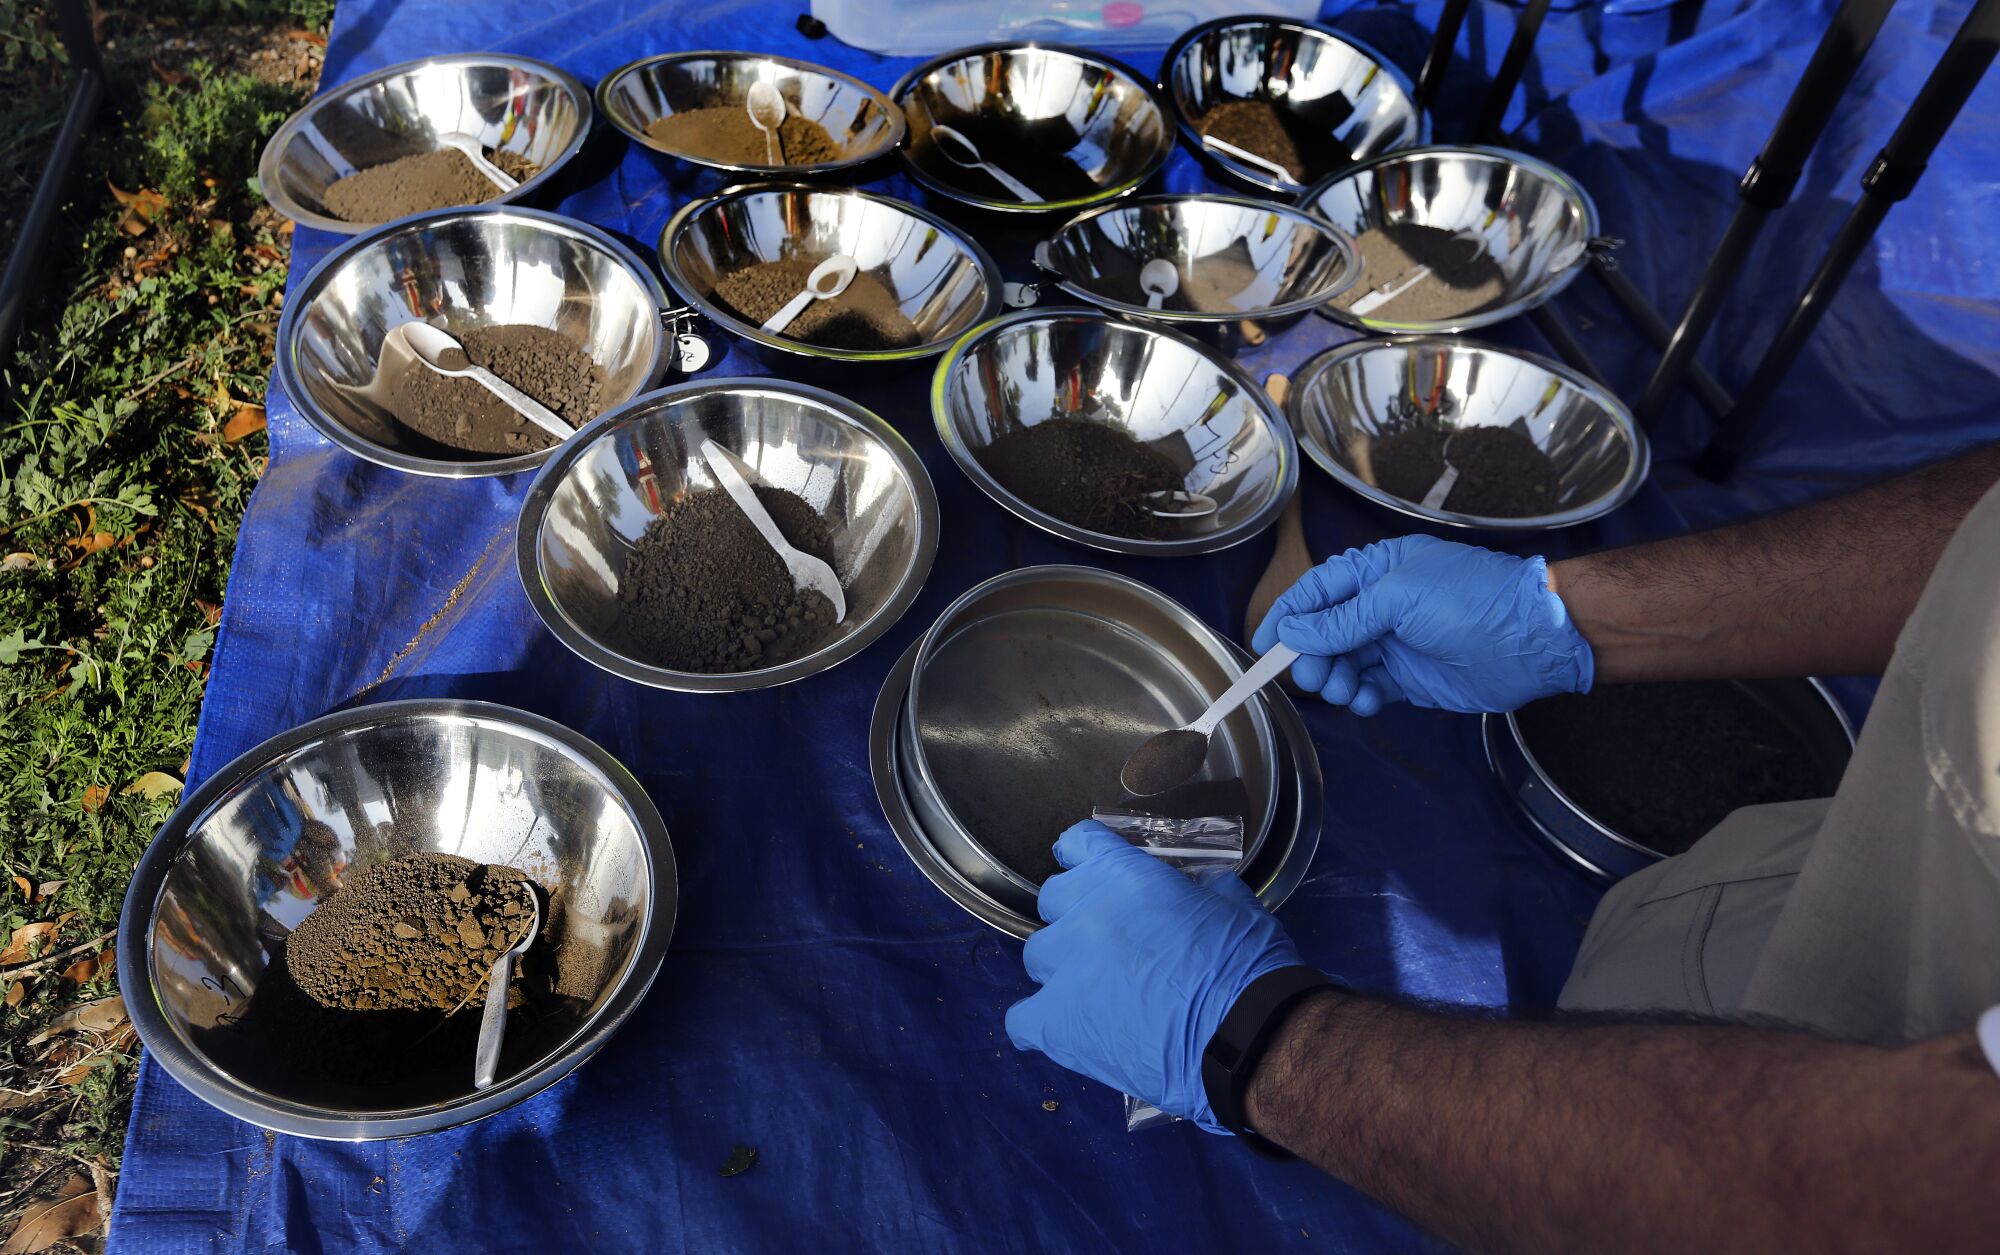 A dozen silver bowls containing dirt are arranged on a table as a worker spoons soil from one bowl into a jar.